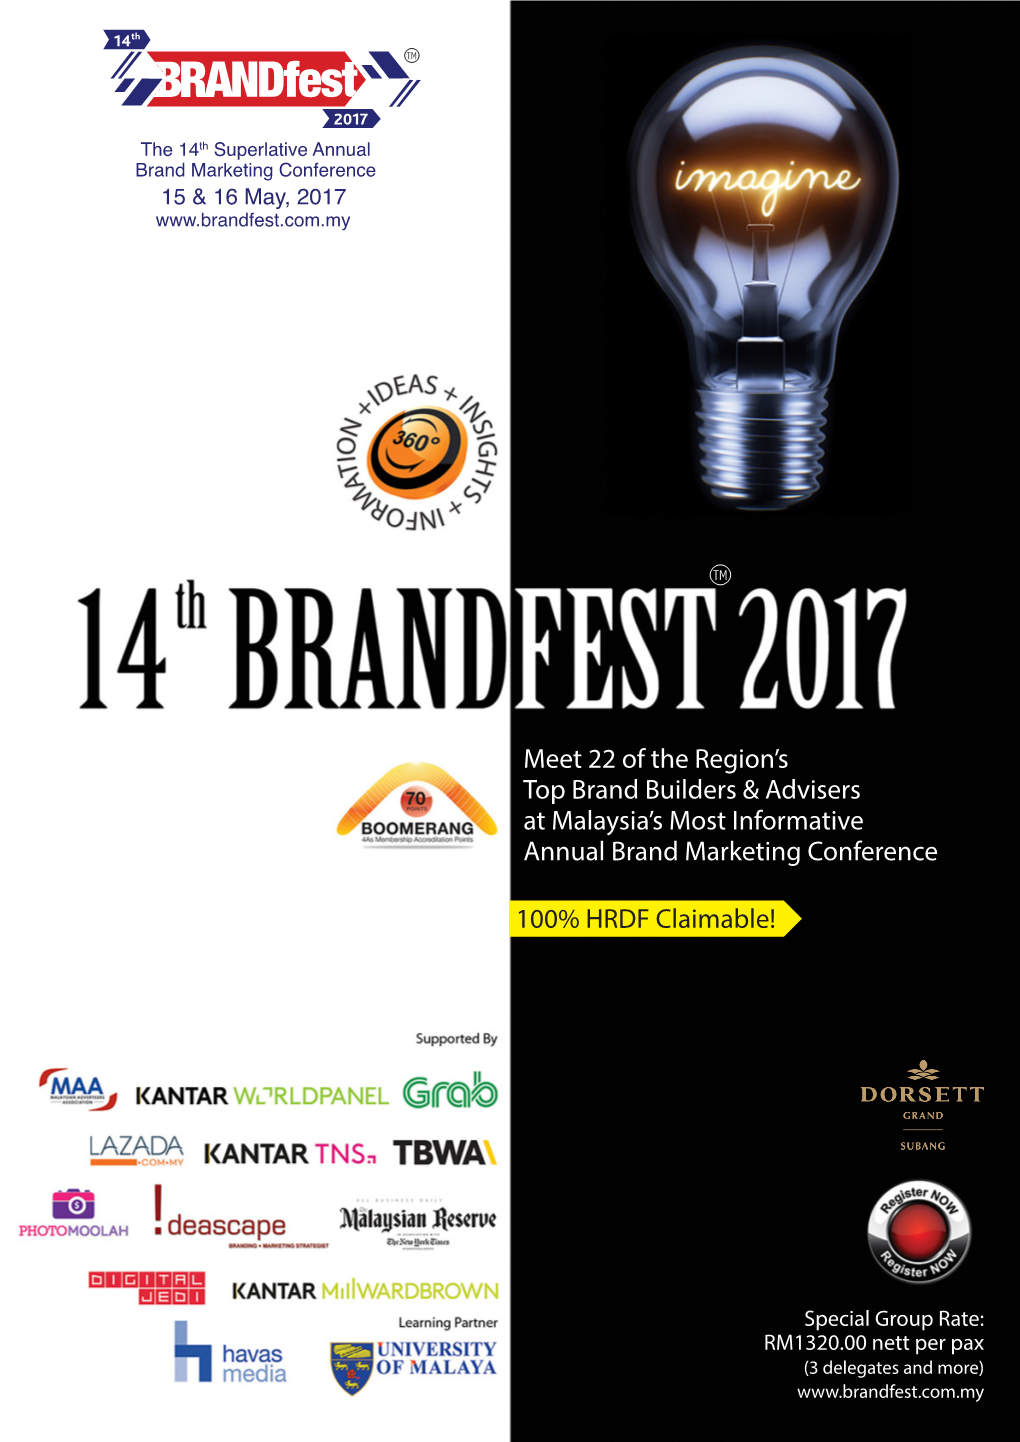 Meet 22 of the Region's Top Brand Builders & Advisers at Malaysia's